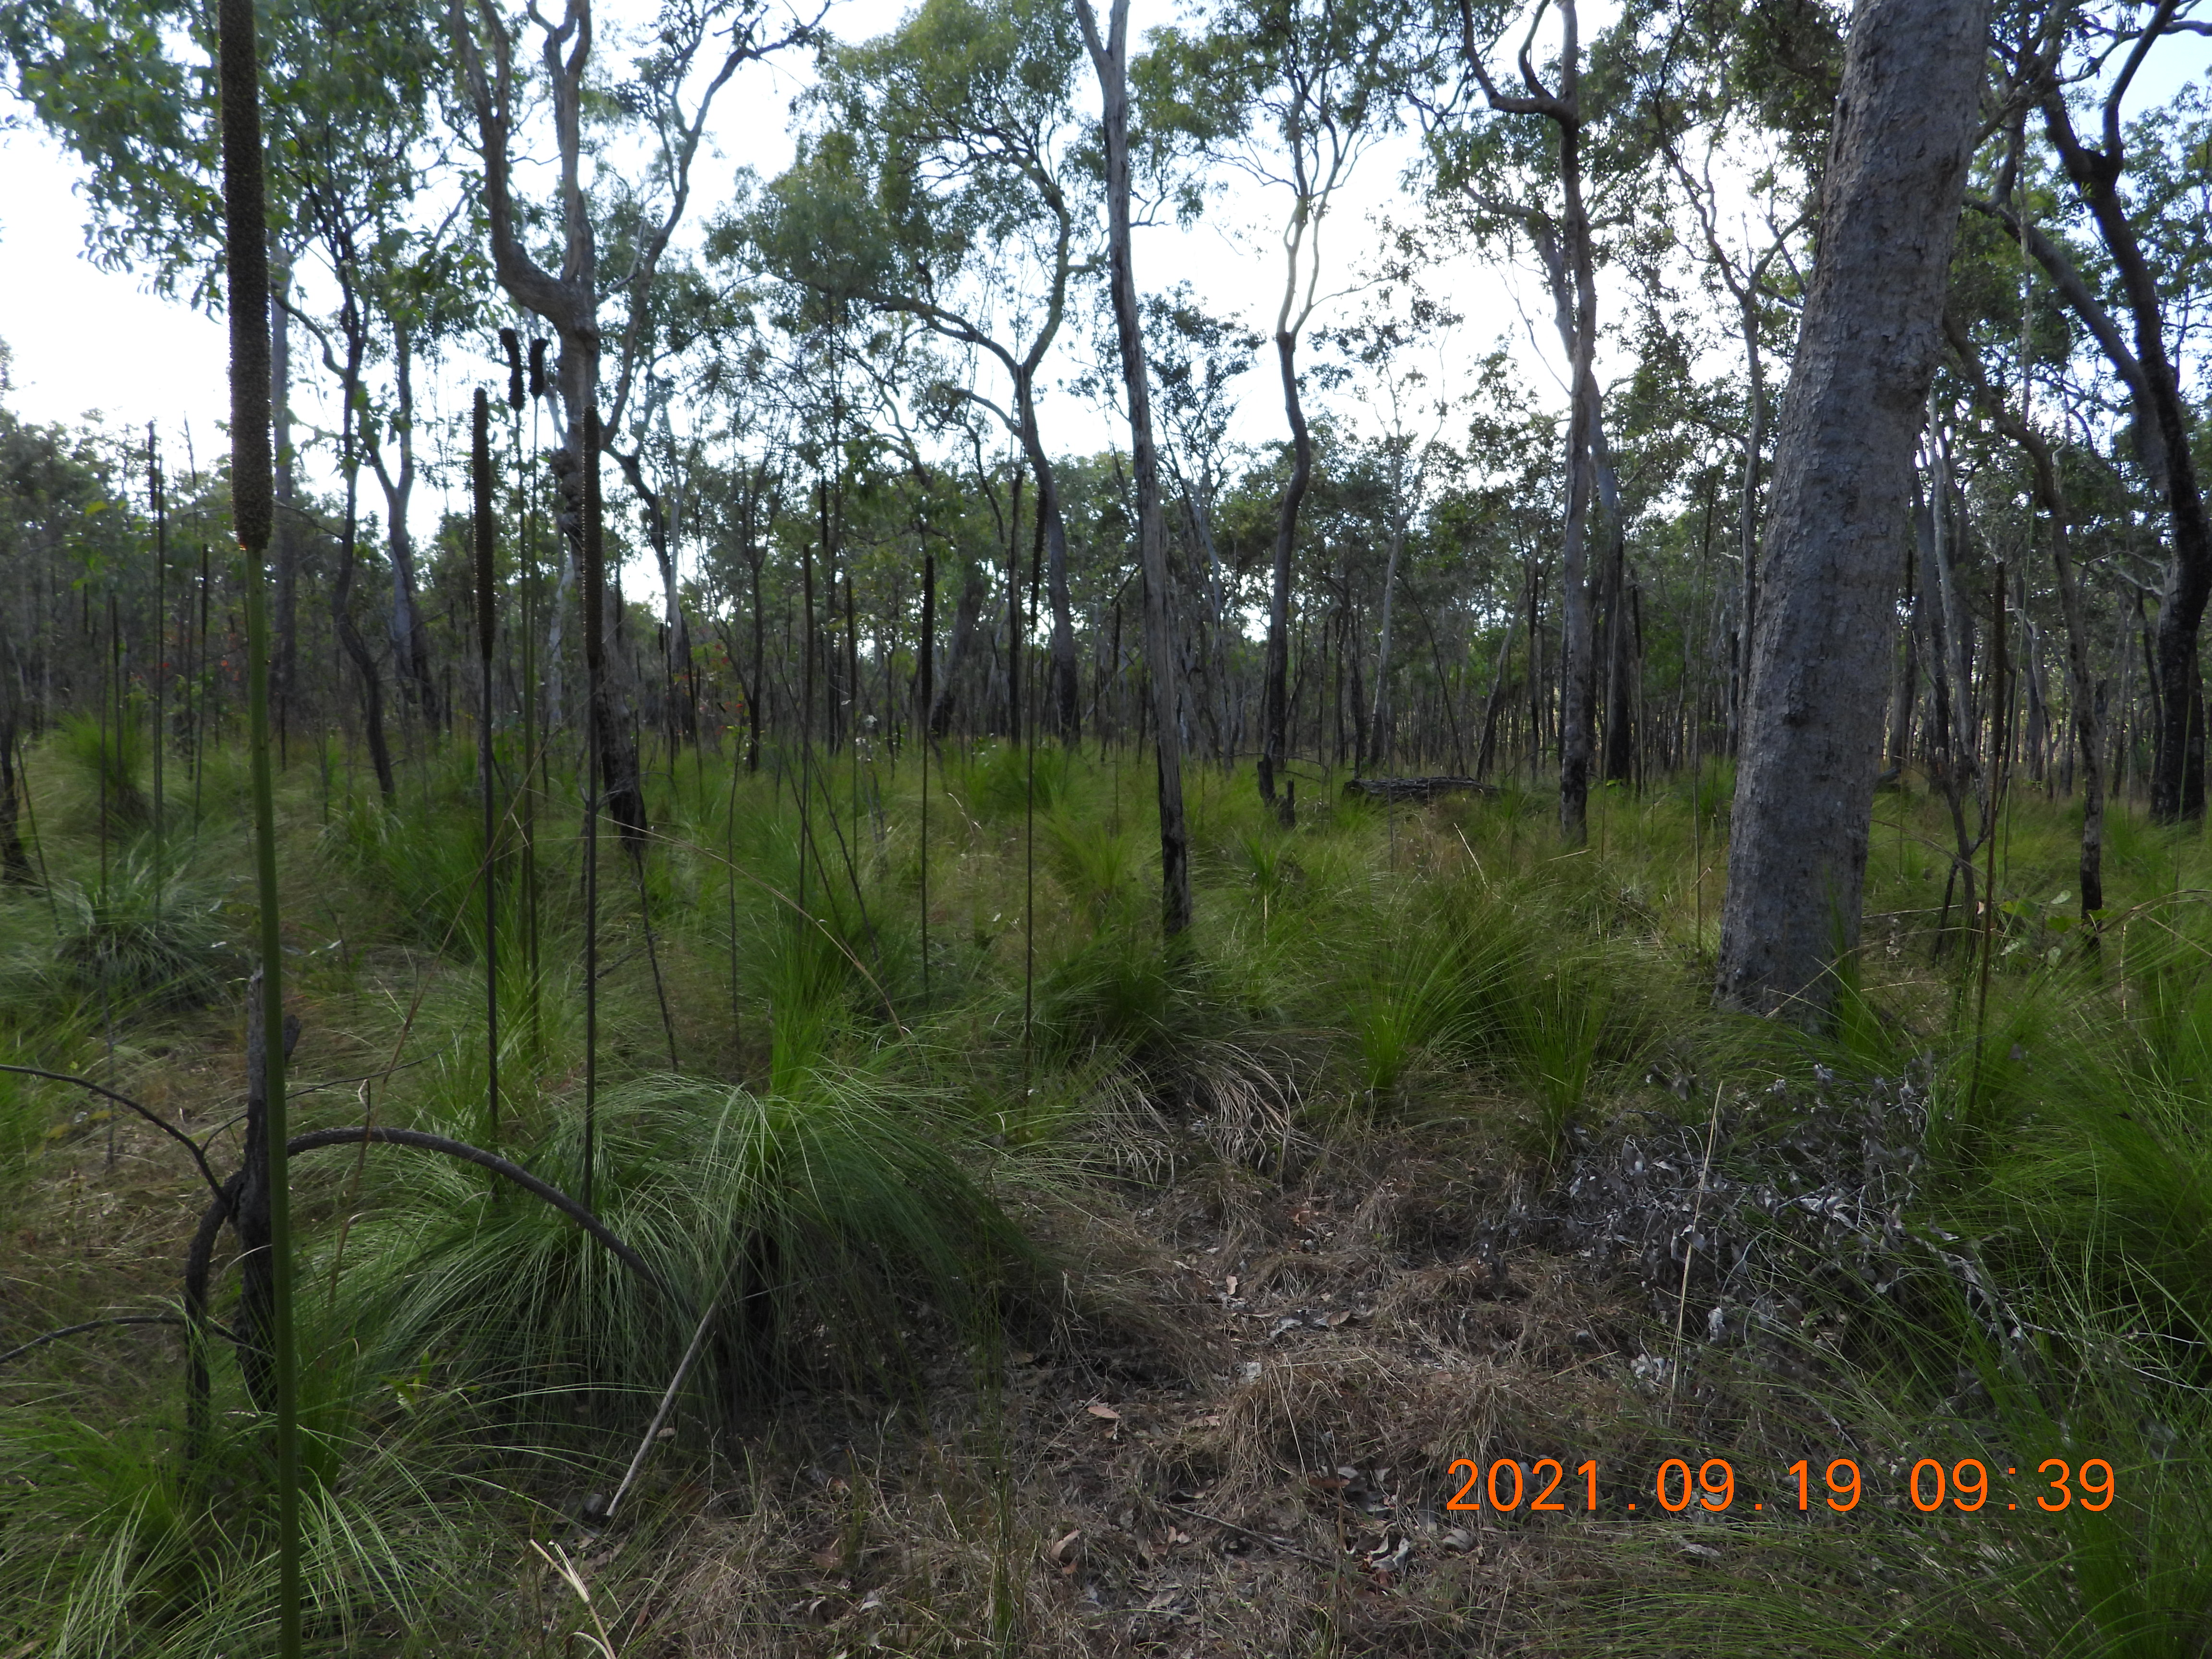 Grass trees grow throughout the area Photo P. Cocks